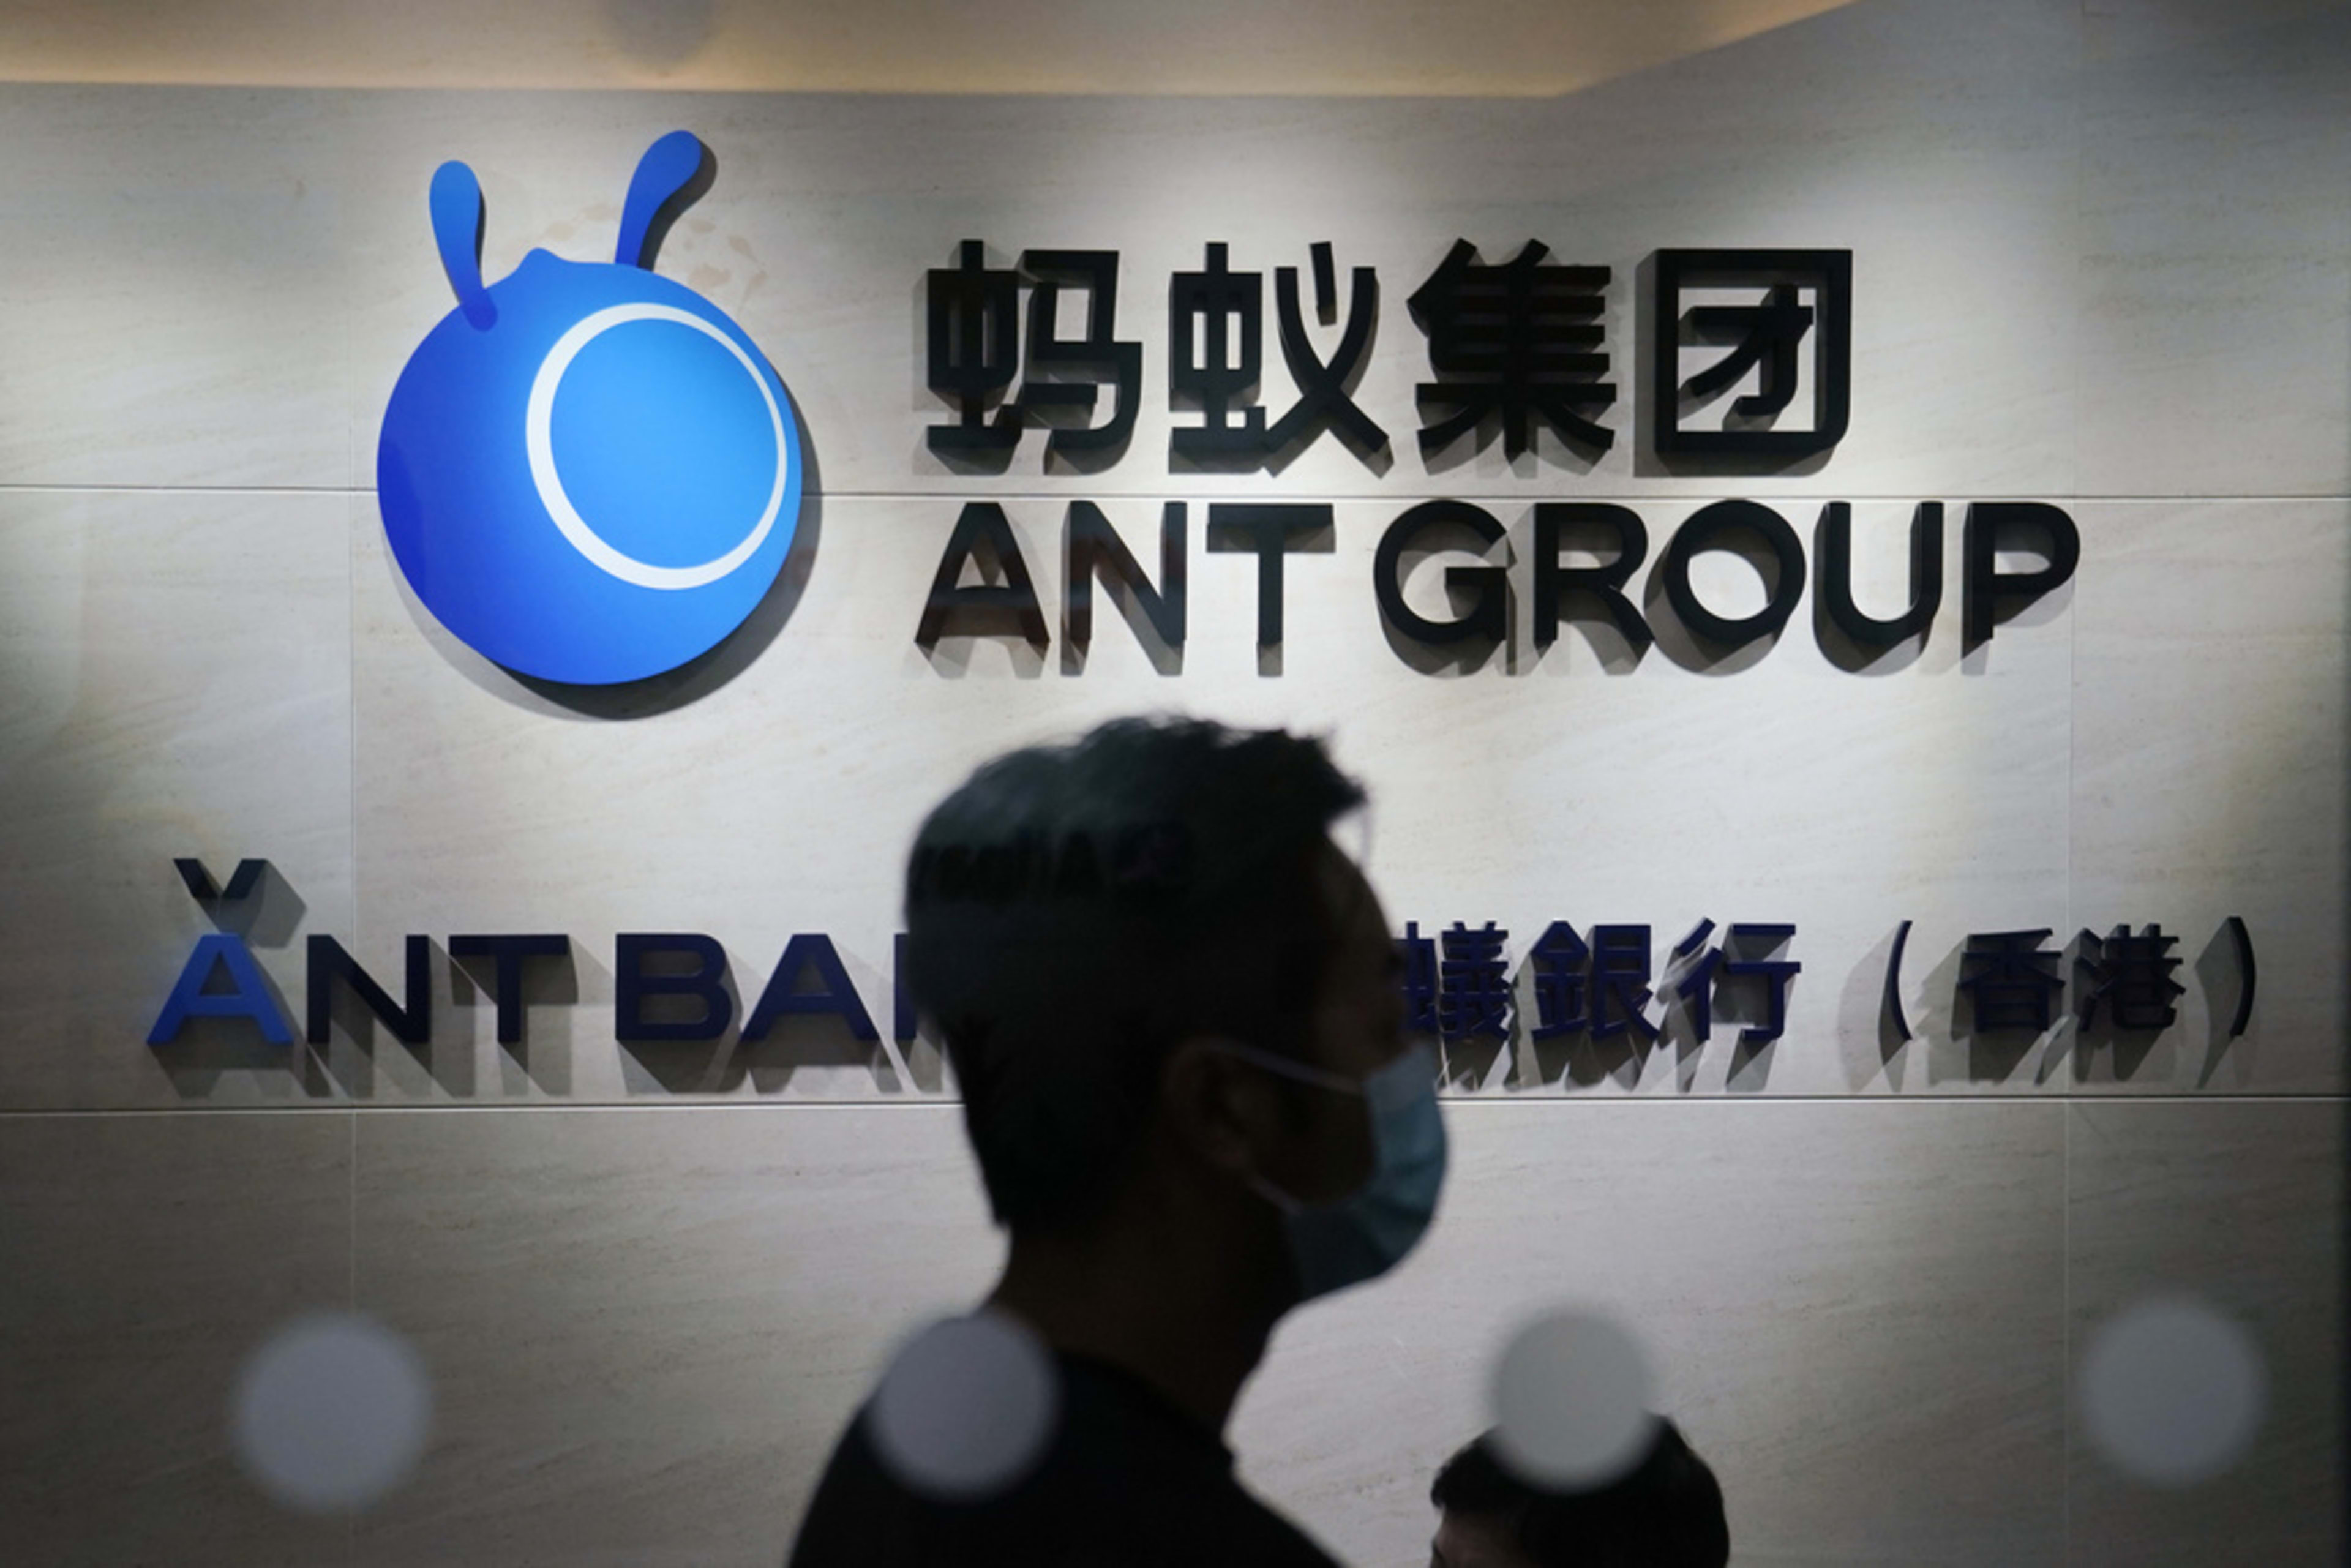 Ant Group, Jack Ma-founded fintech giant, gets fined almost $1 billion by China regulators